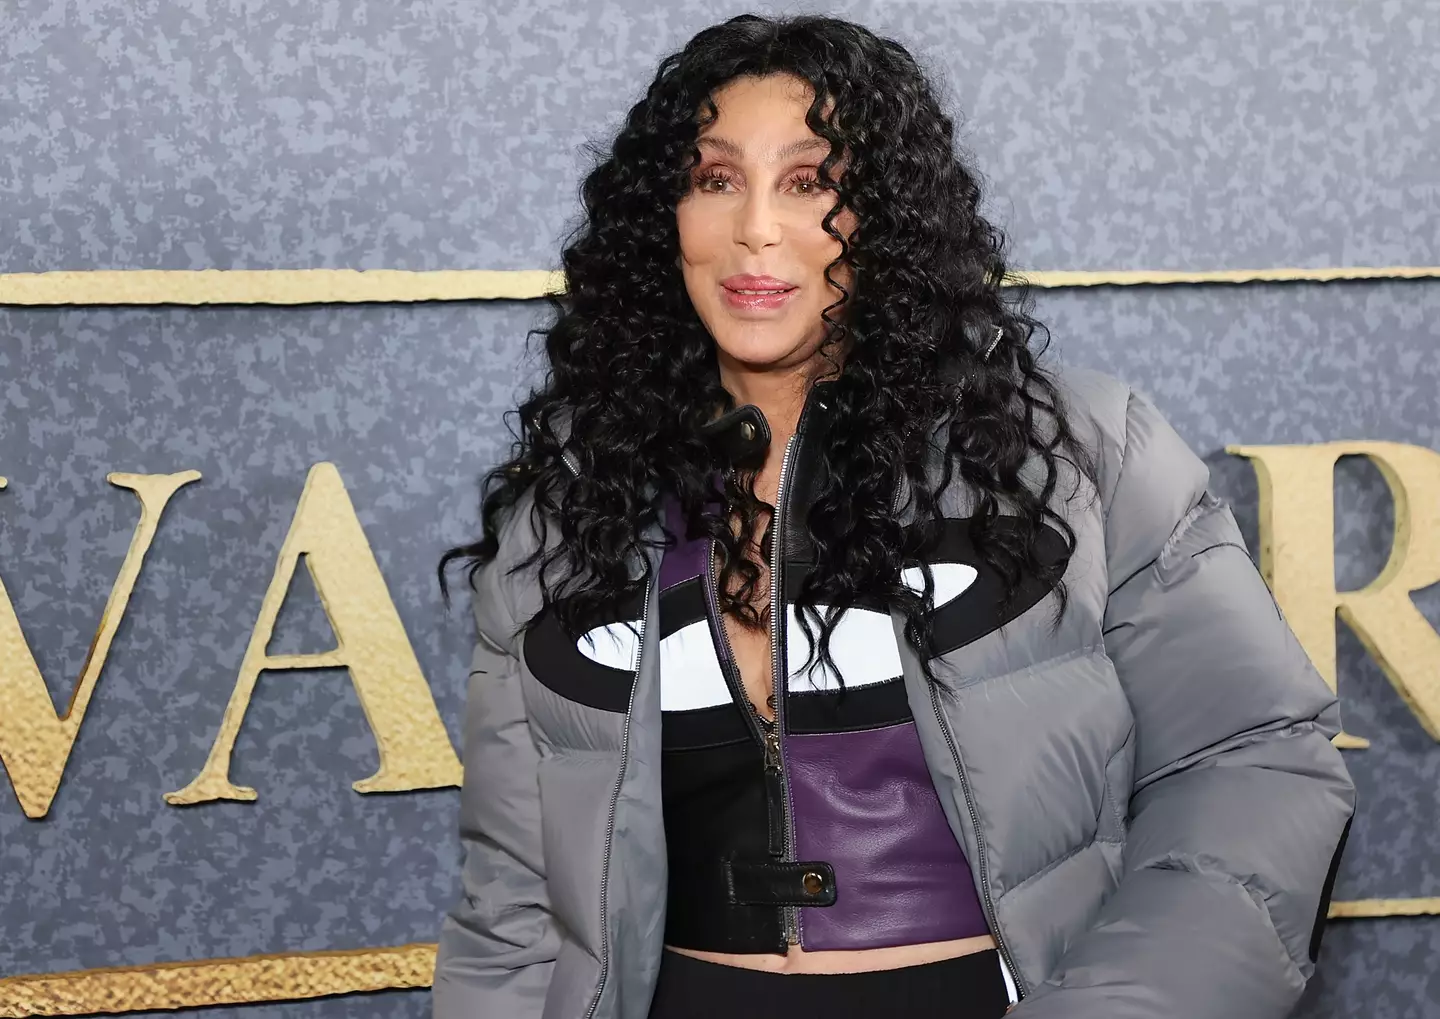 Cher has been accused of arranging for her son to be 'kidnapped'.